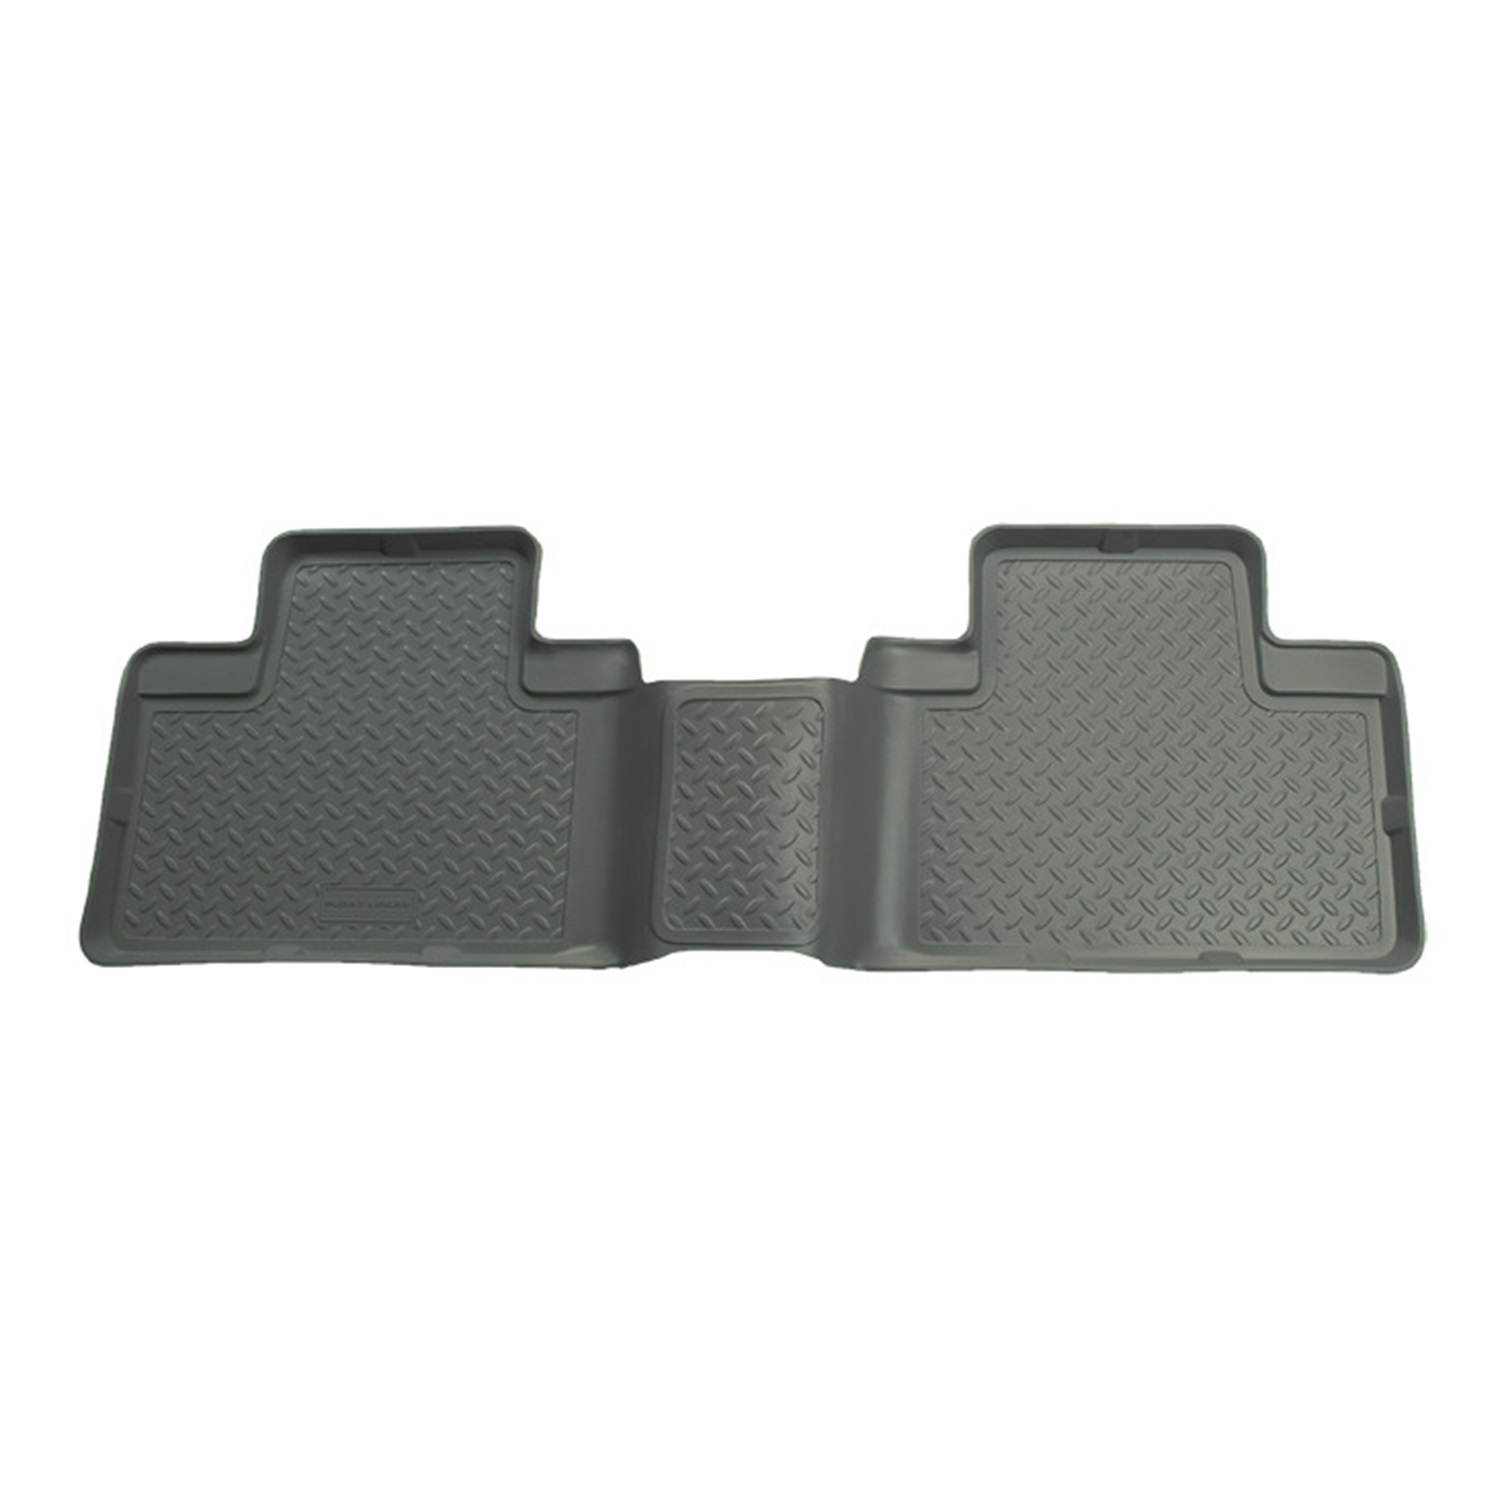 Husky Liners Husky Liners 73532 Classic Style; Floor Liner Fits 07-14 Expedition Navigator